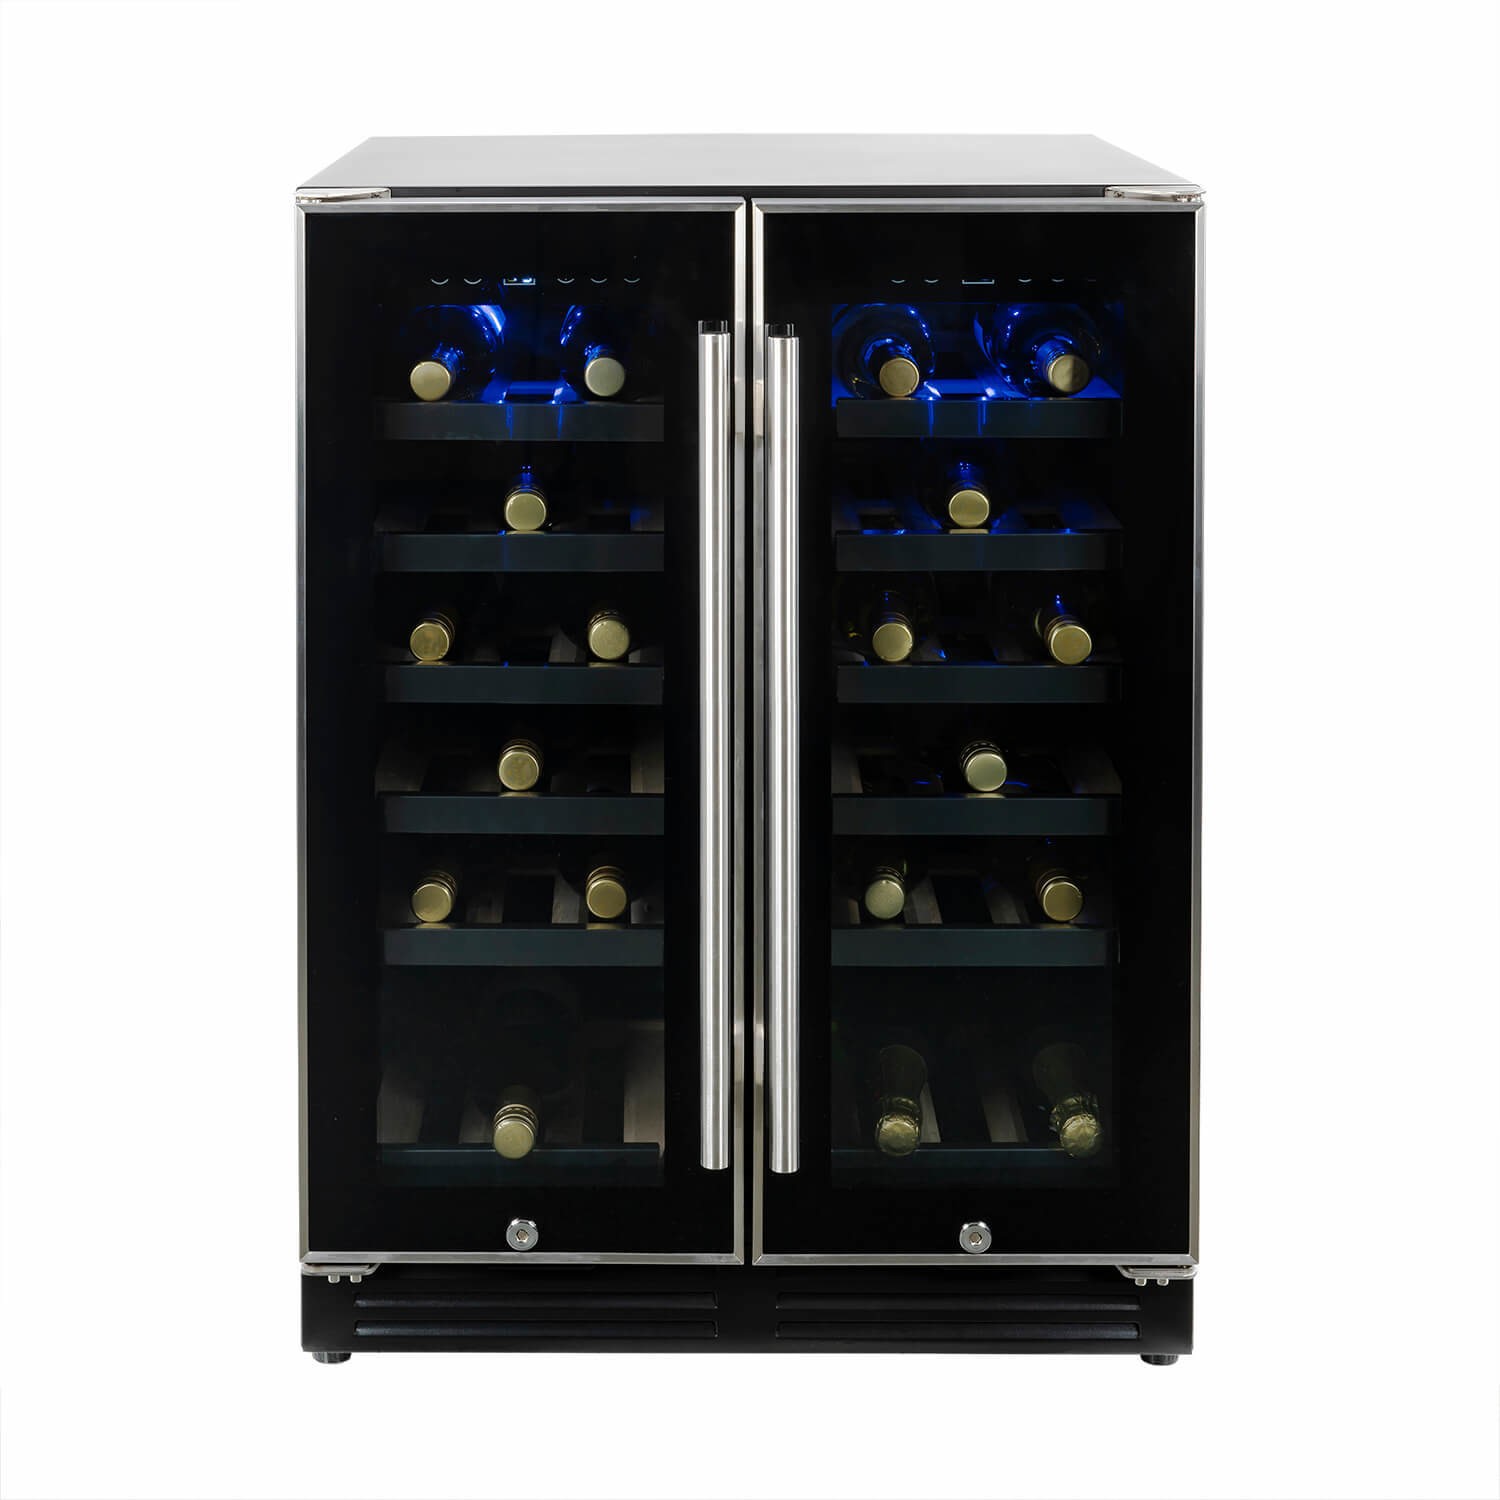 electriQ 36 Bottle Capacity Dual Zone Under Counter Freestanding Wine Cooler- Stainless Steel